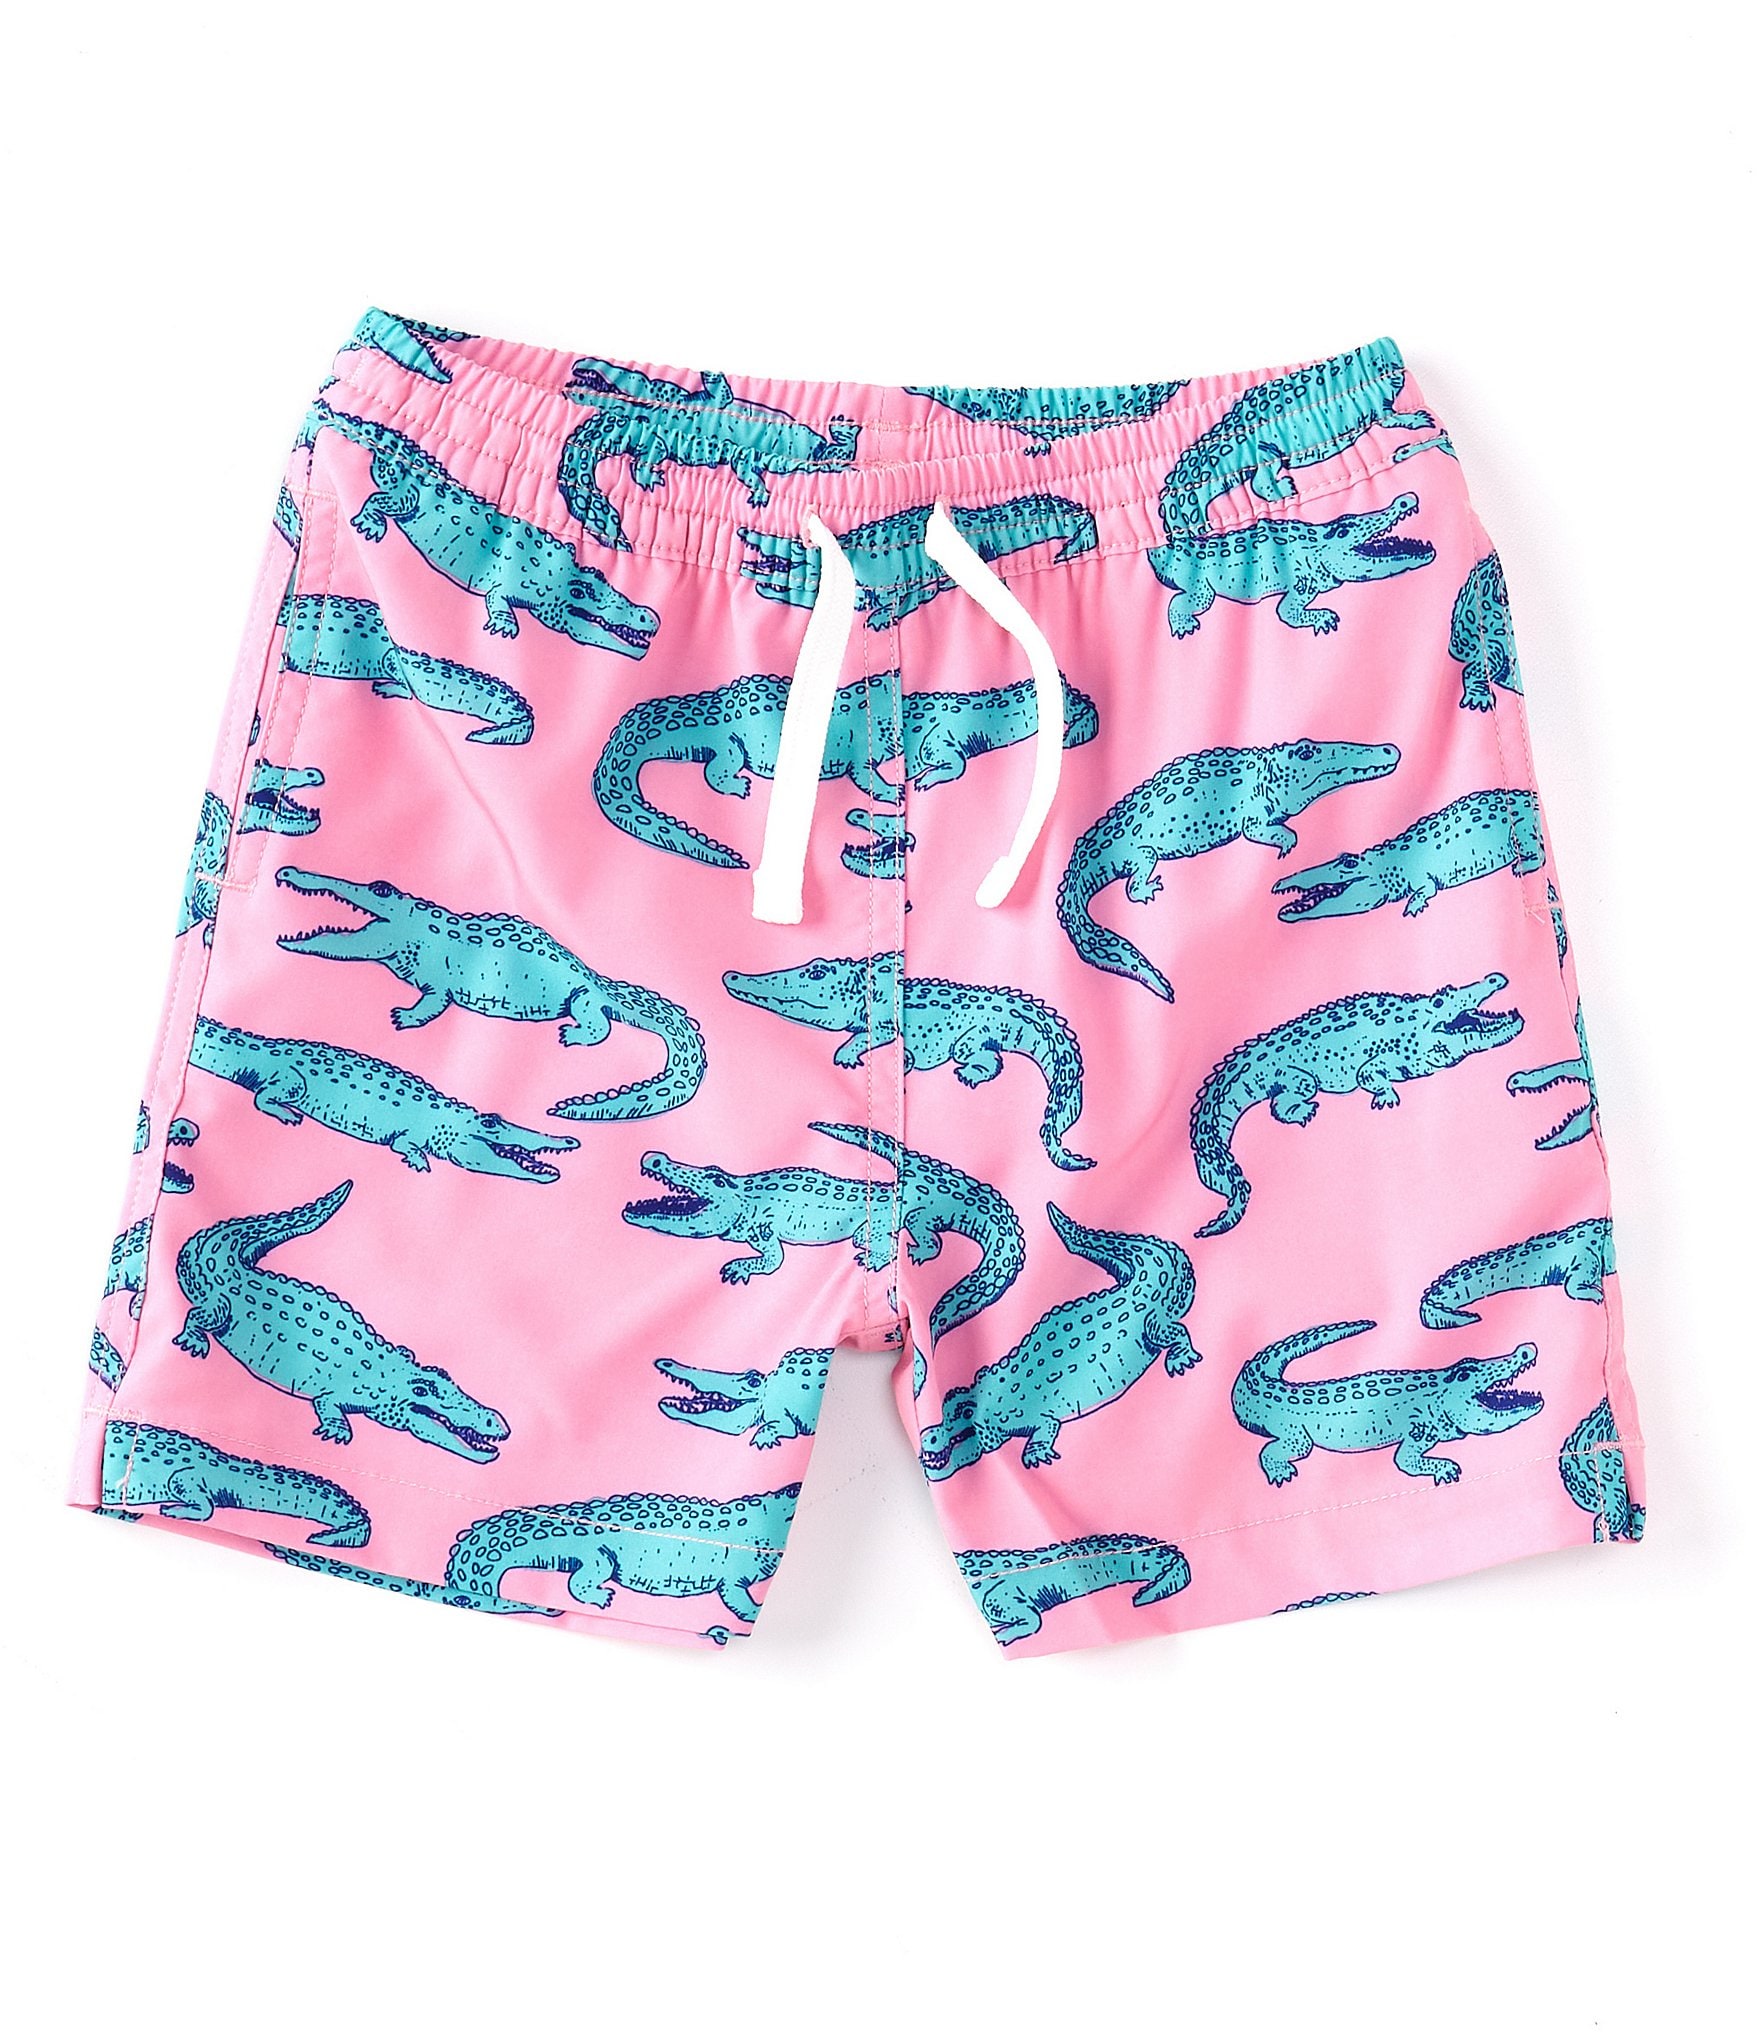 Chubbies Little Boys 2T-6 Family Matching Lil Glades Swim Trunks ...